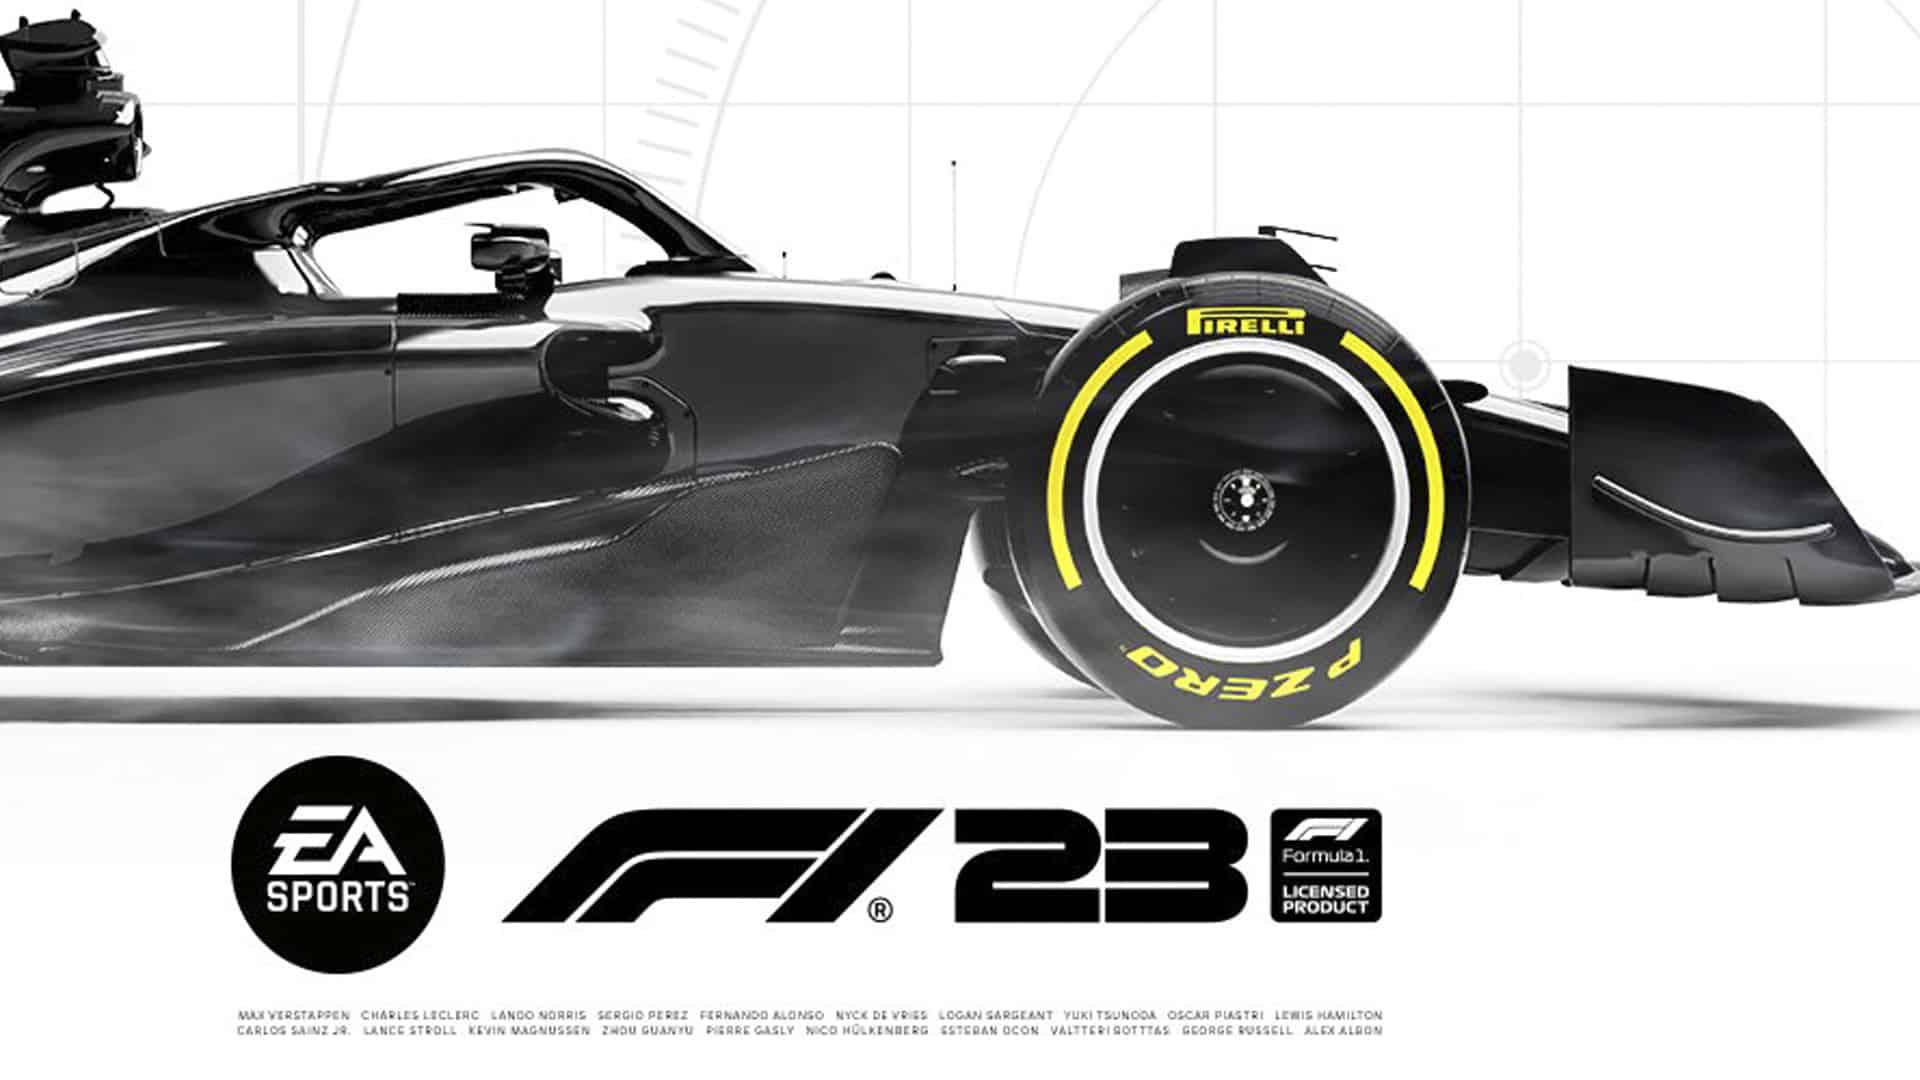 EA SPORTS F1 23 will called F1 SPORTS EA | Traxion be 23